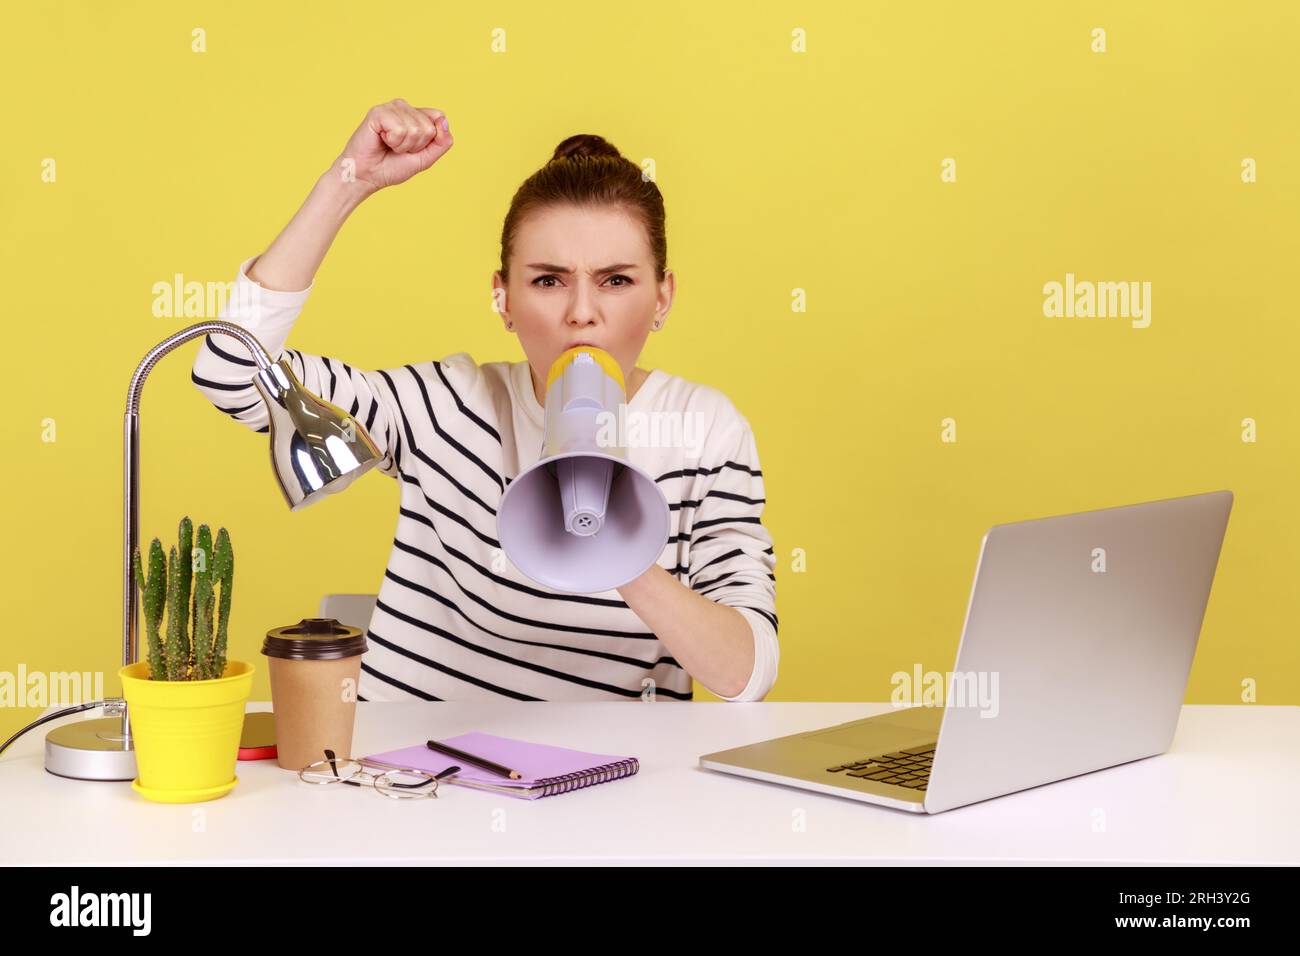 Portrait of angry woman loudly screaming at megaphone, making announce, protesting, wants to be heard, sitting on workplace. Indoor studio studio shot isolated on yellow background. Stock Photo